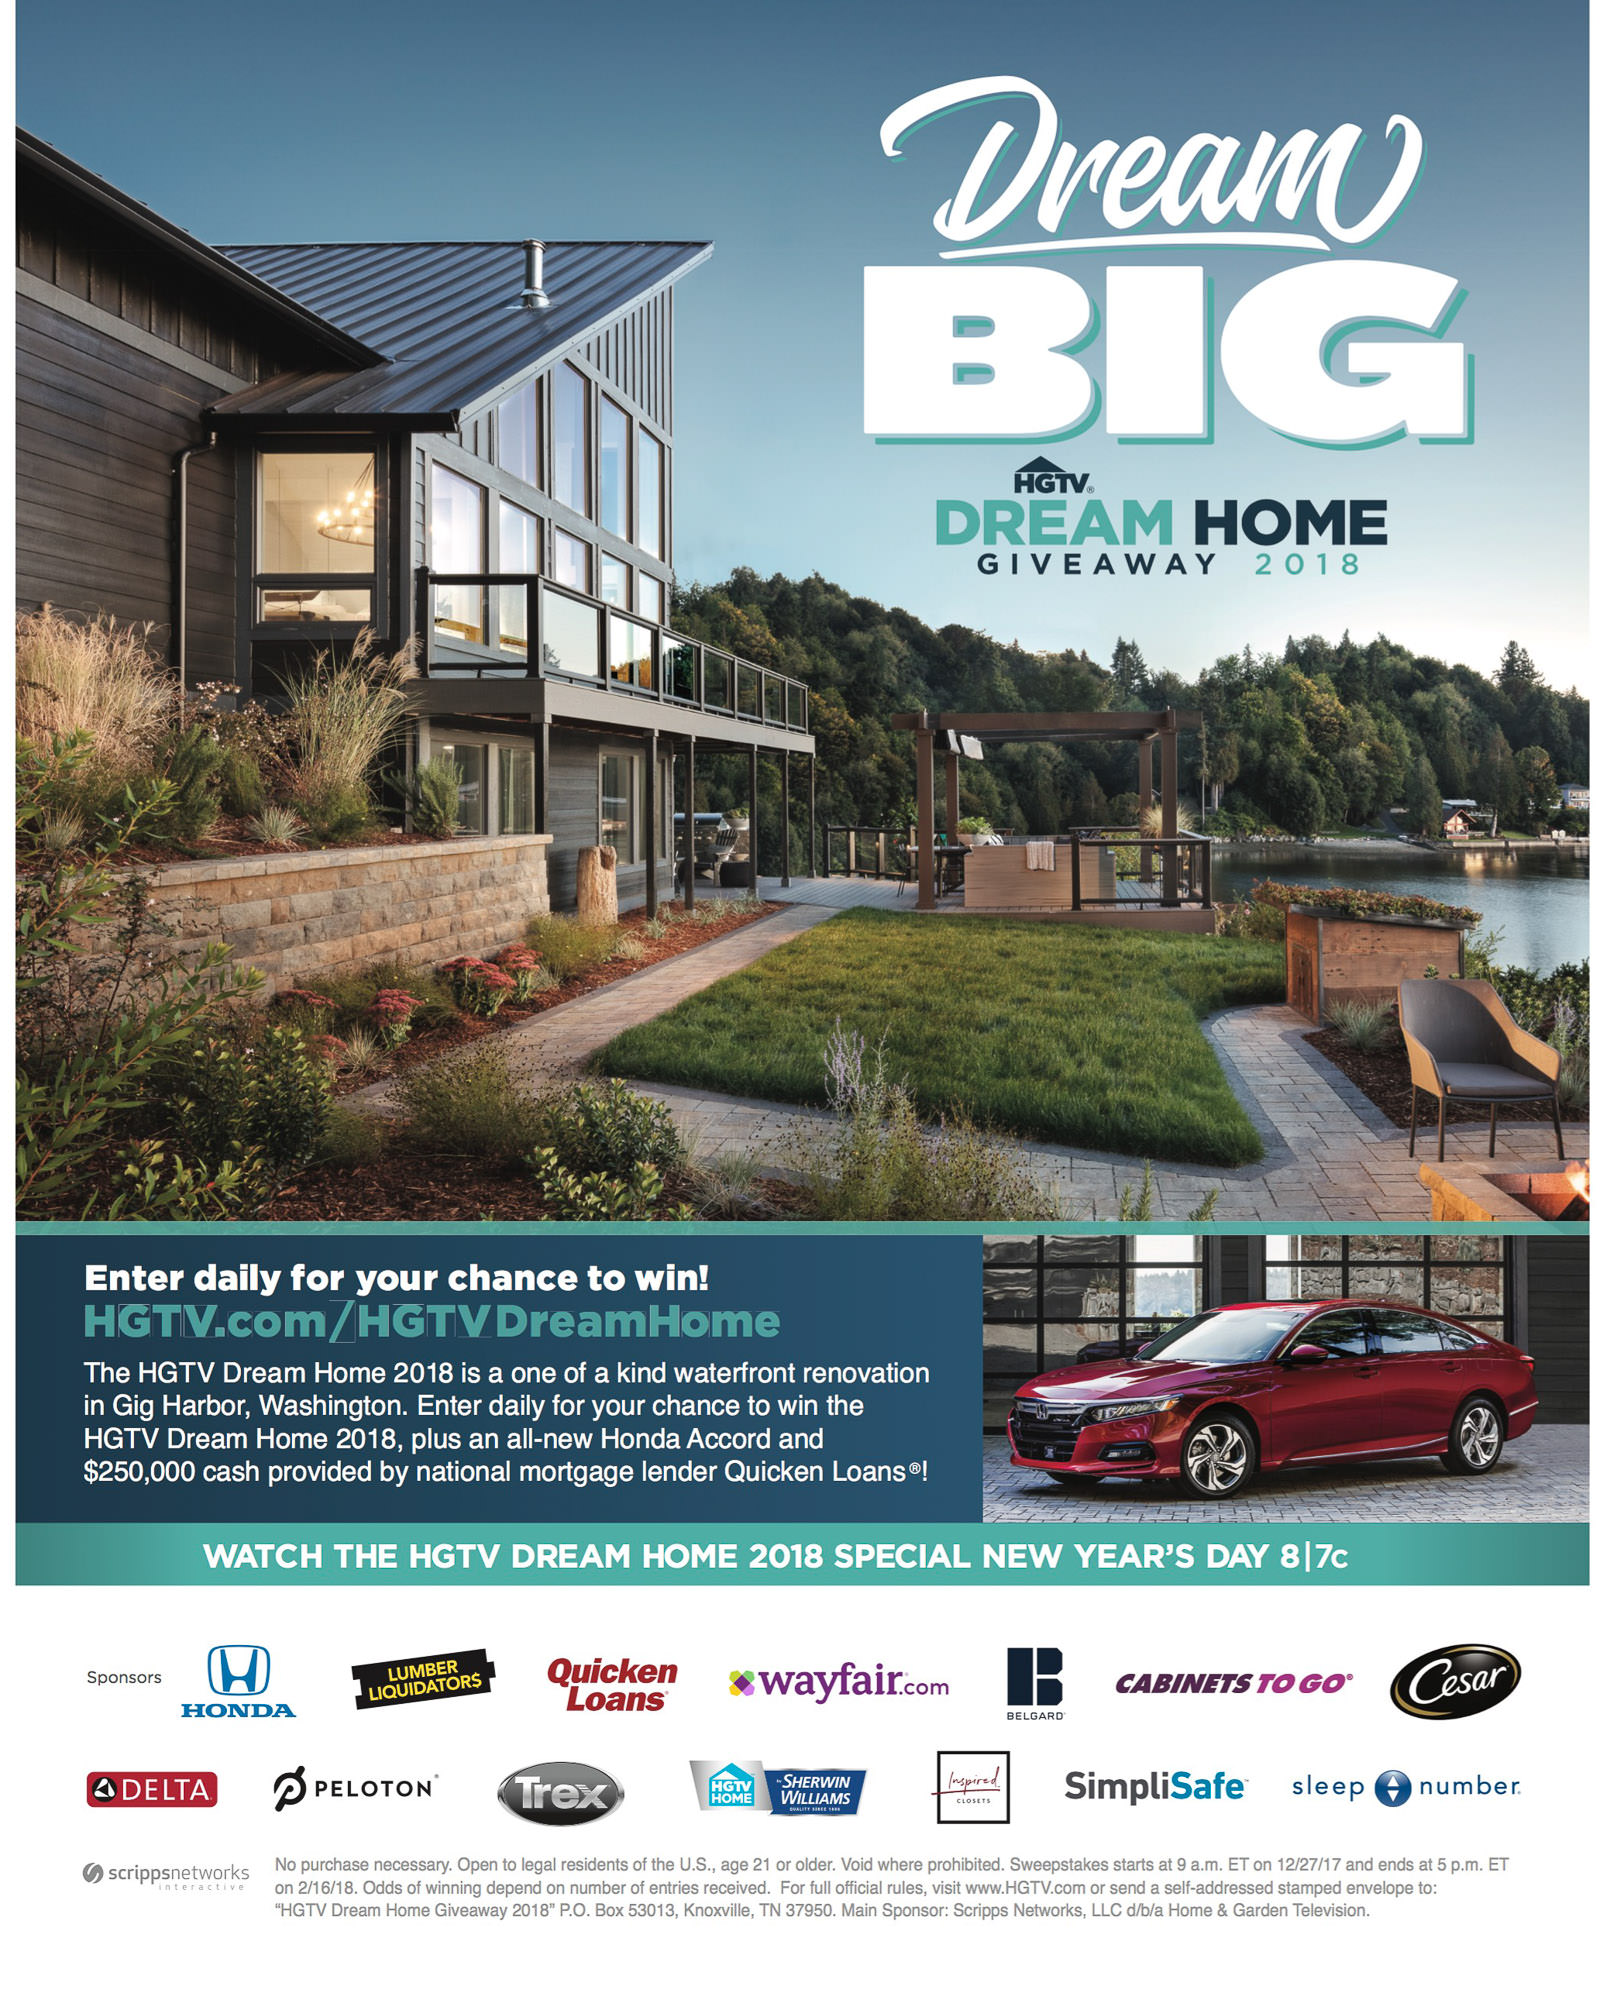 HGTV: Dream Home Giveaway 2018